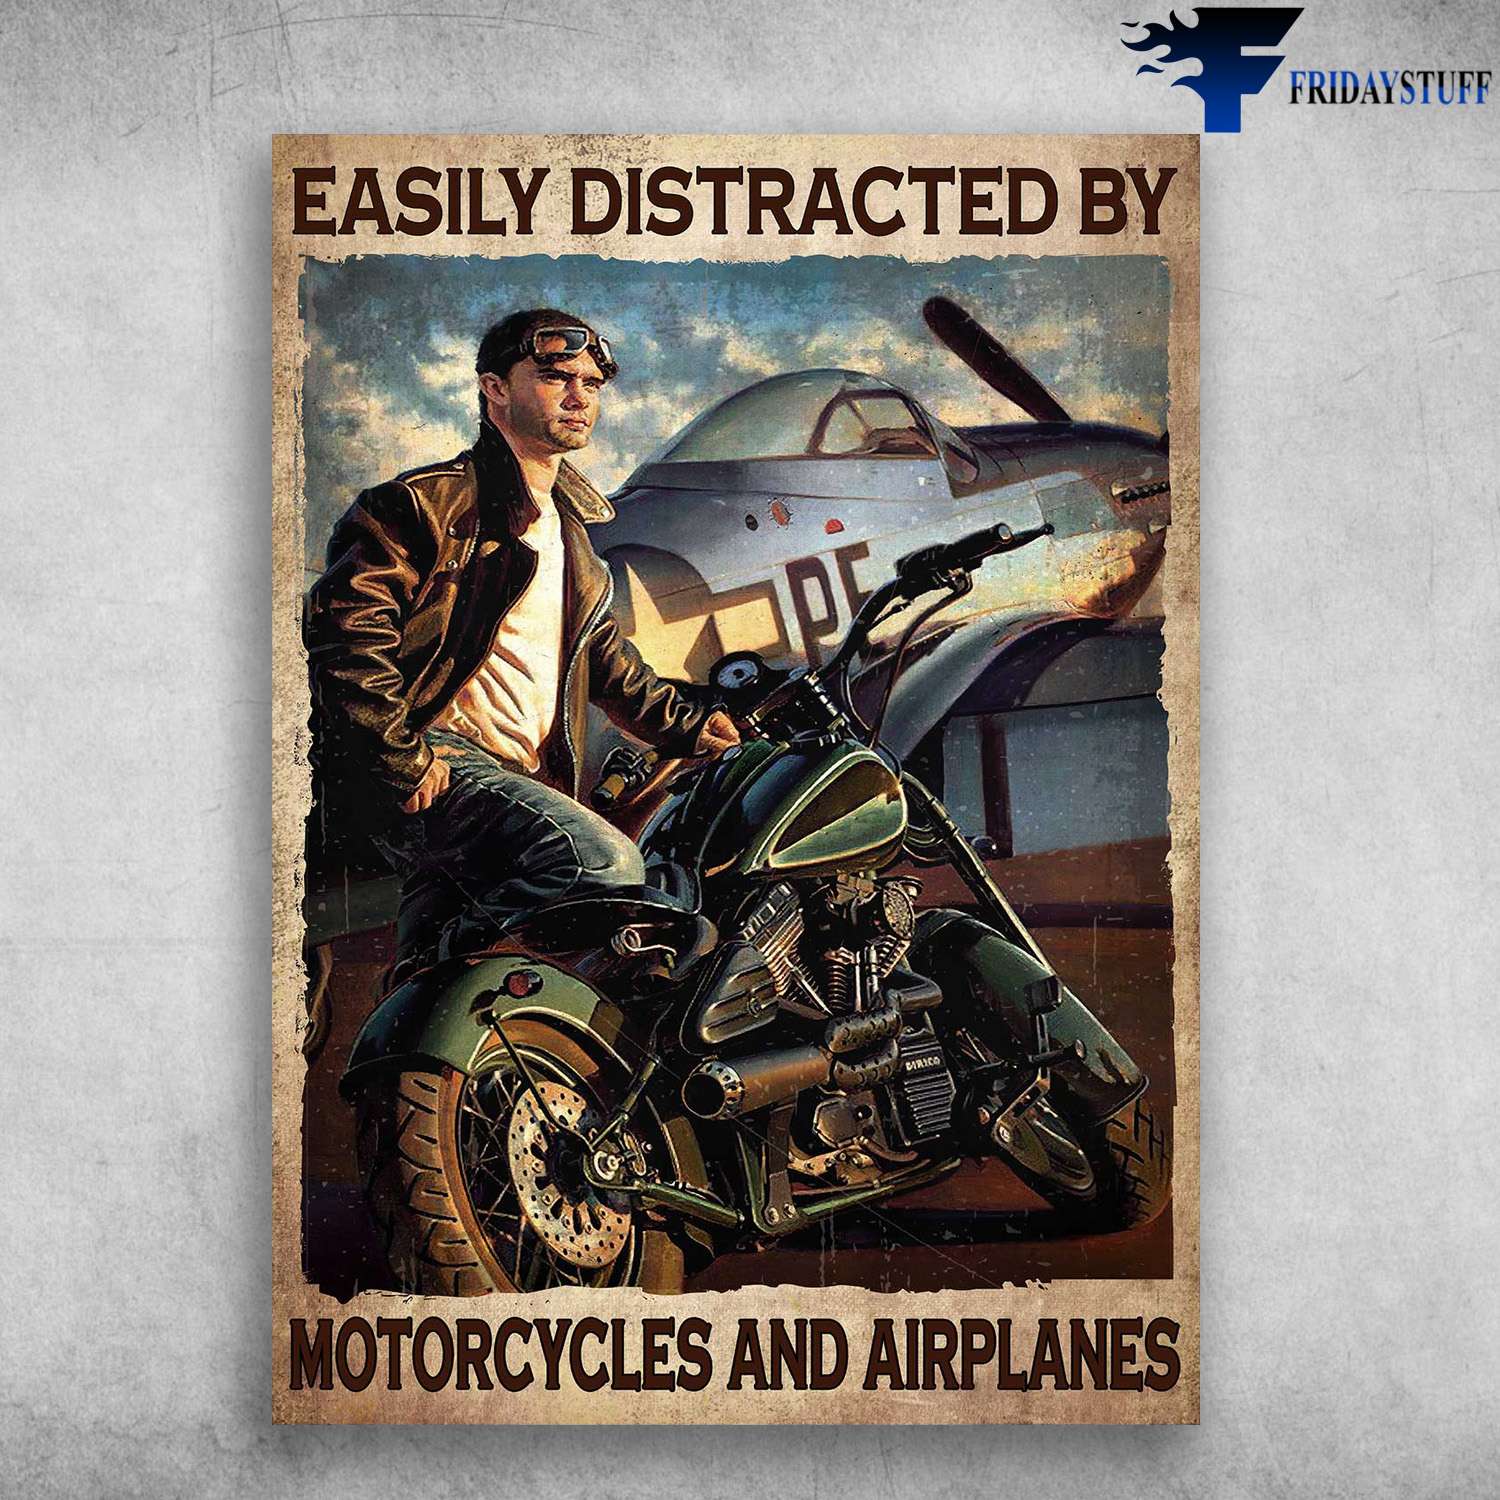 Motorcycle Man, Pilot Aircraft - Easily Distracted By, Motorcycles And Airplanes